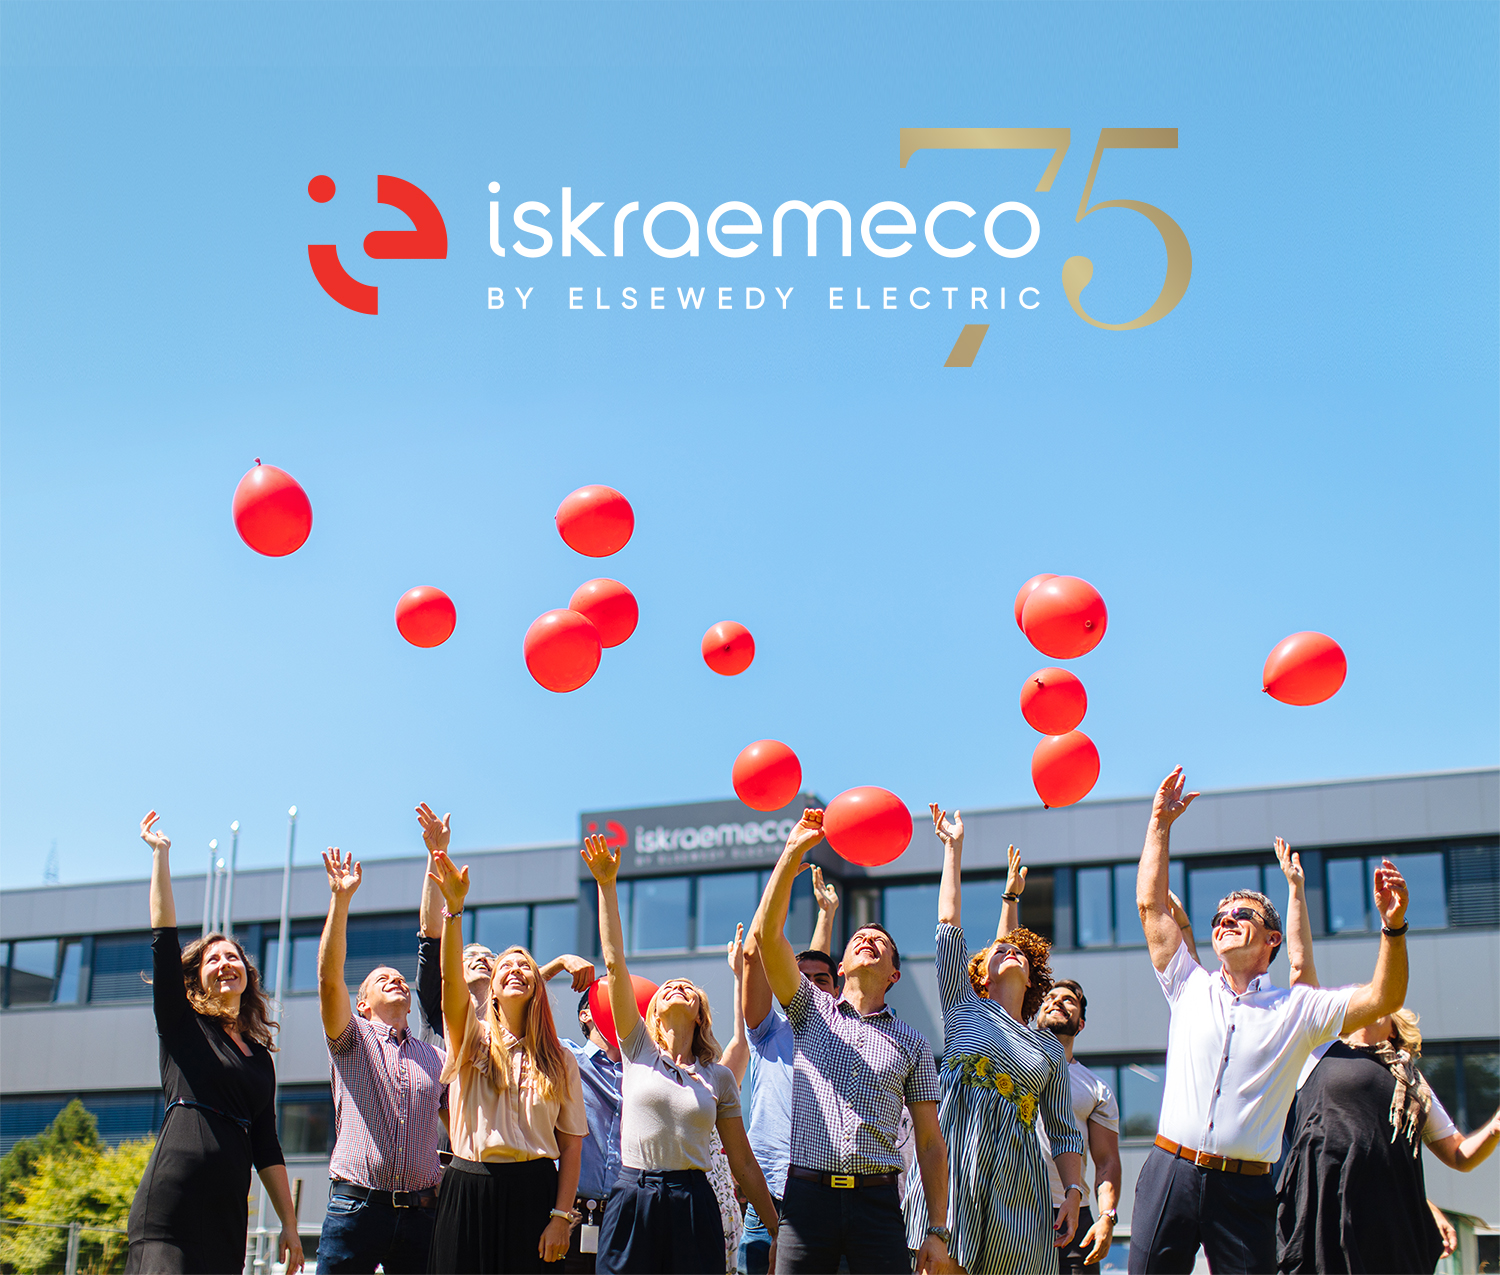 Iskraemeco is celebrating! Together we dare to dream about the next 75 years in business!